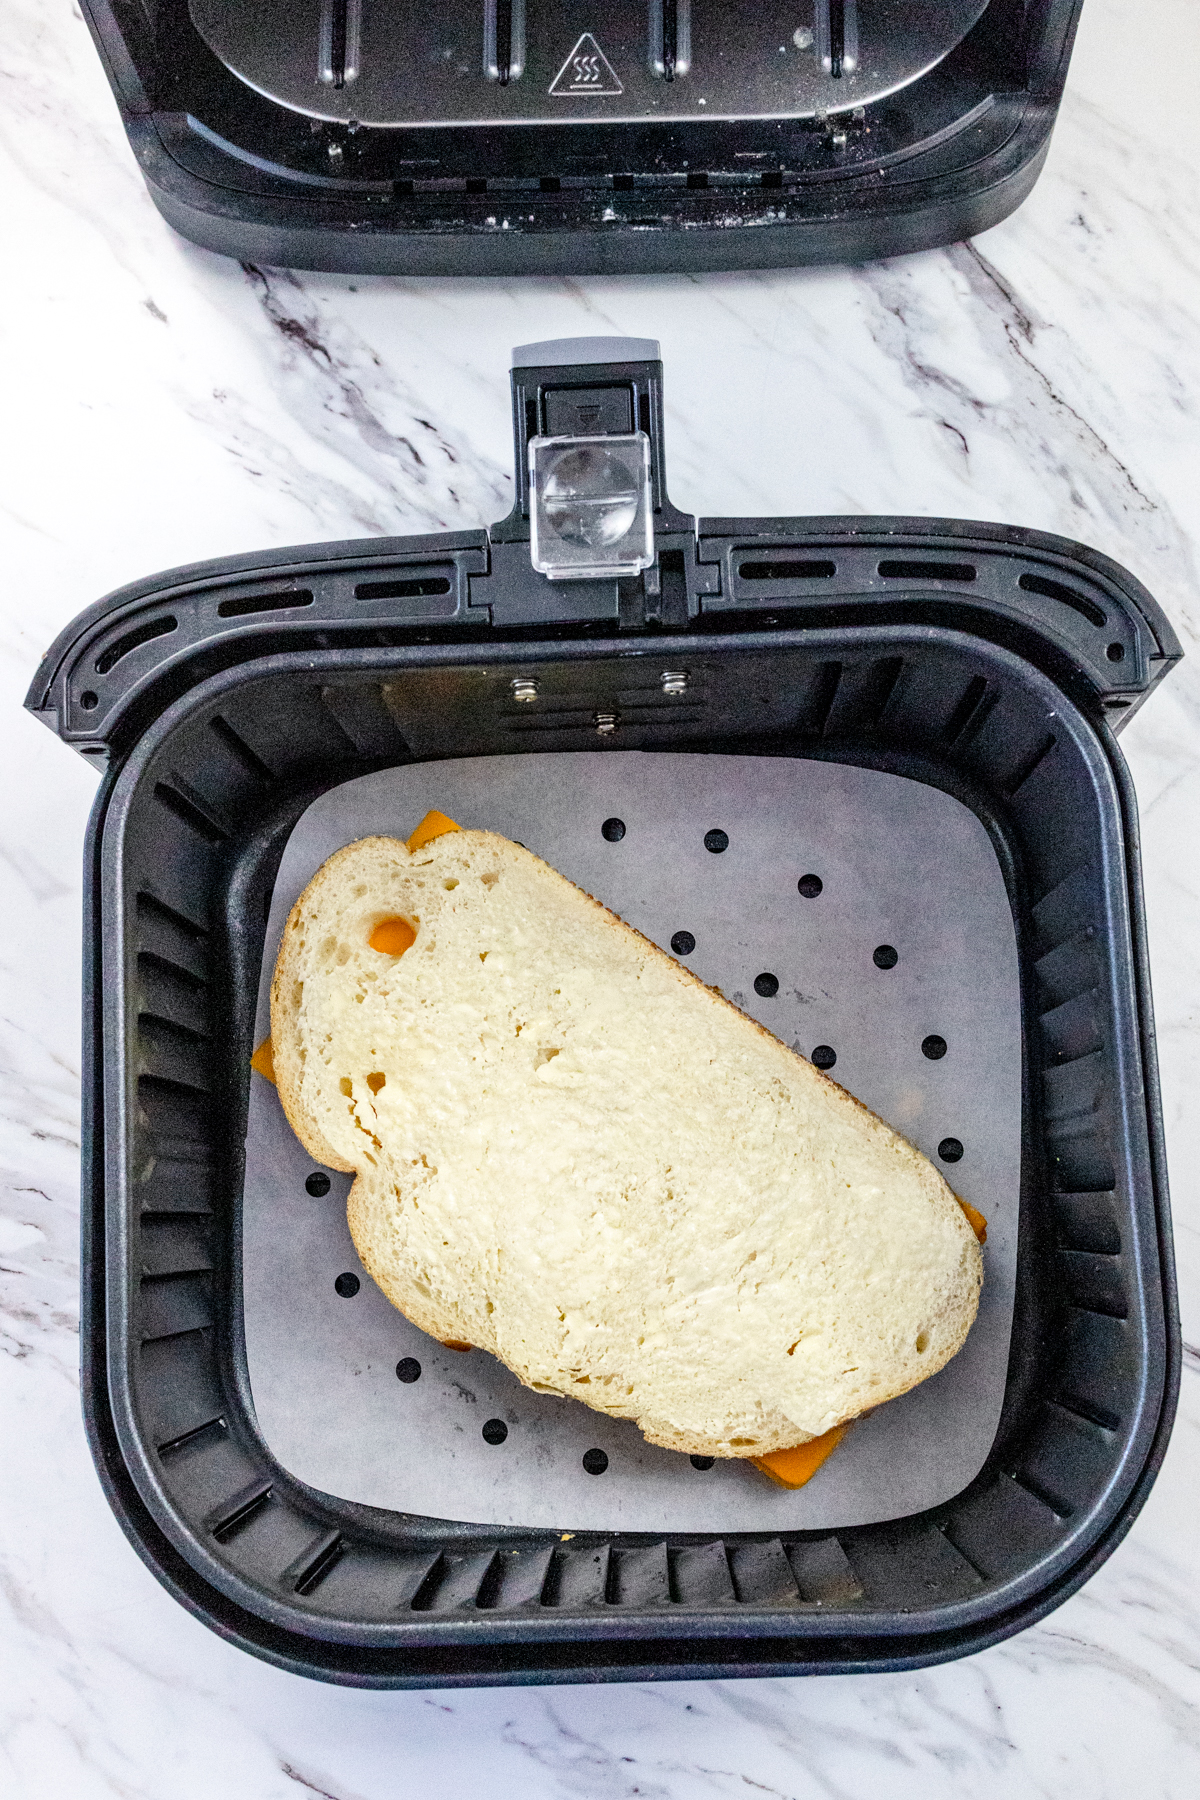 Top view of air fryer basket with a cheese sandwich in it, on top of parchemnet paper.